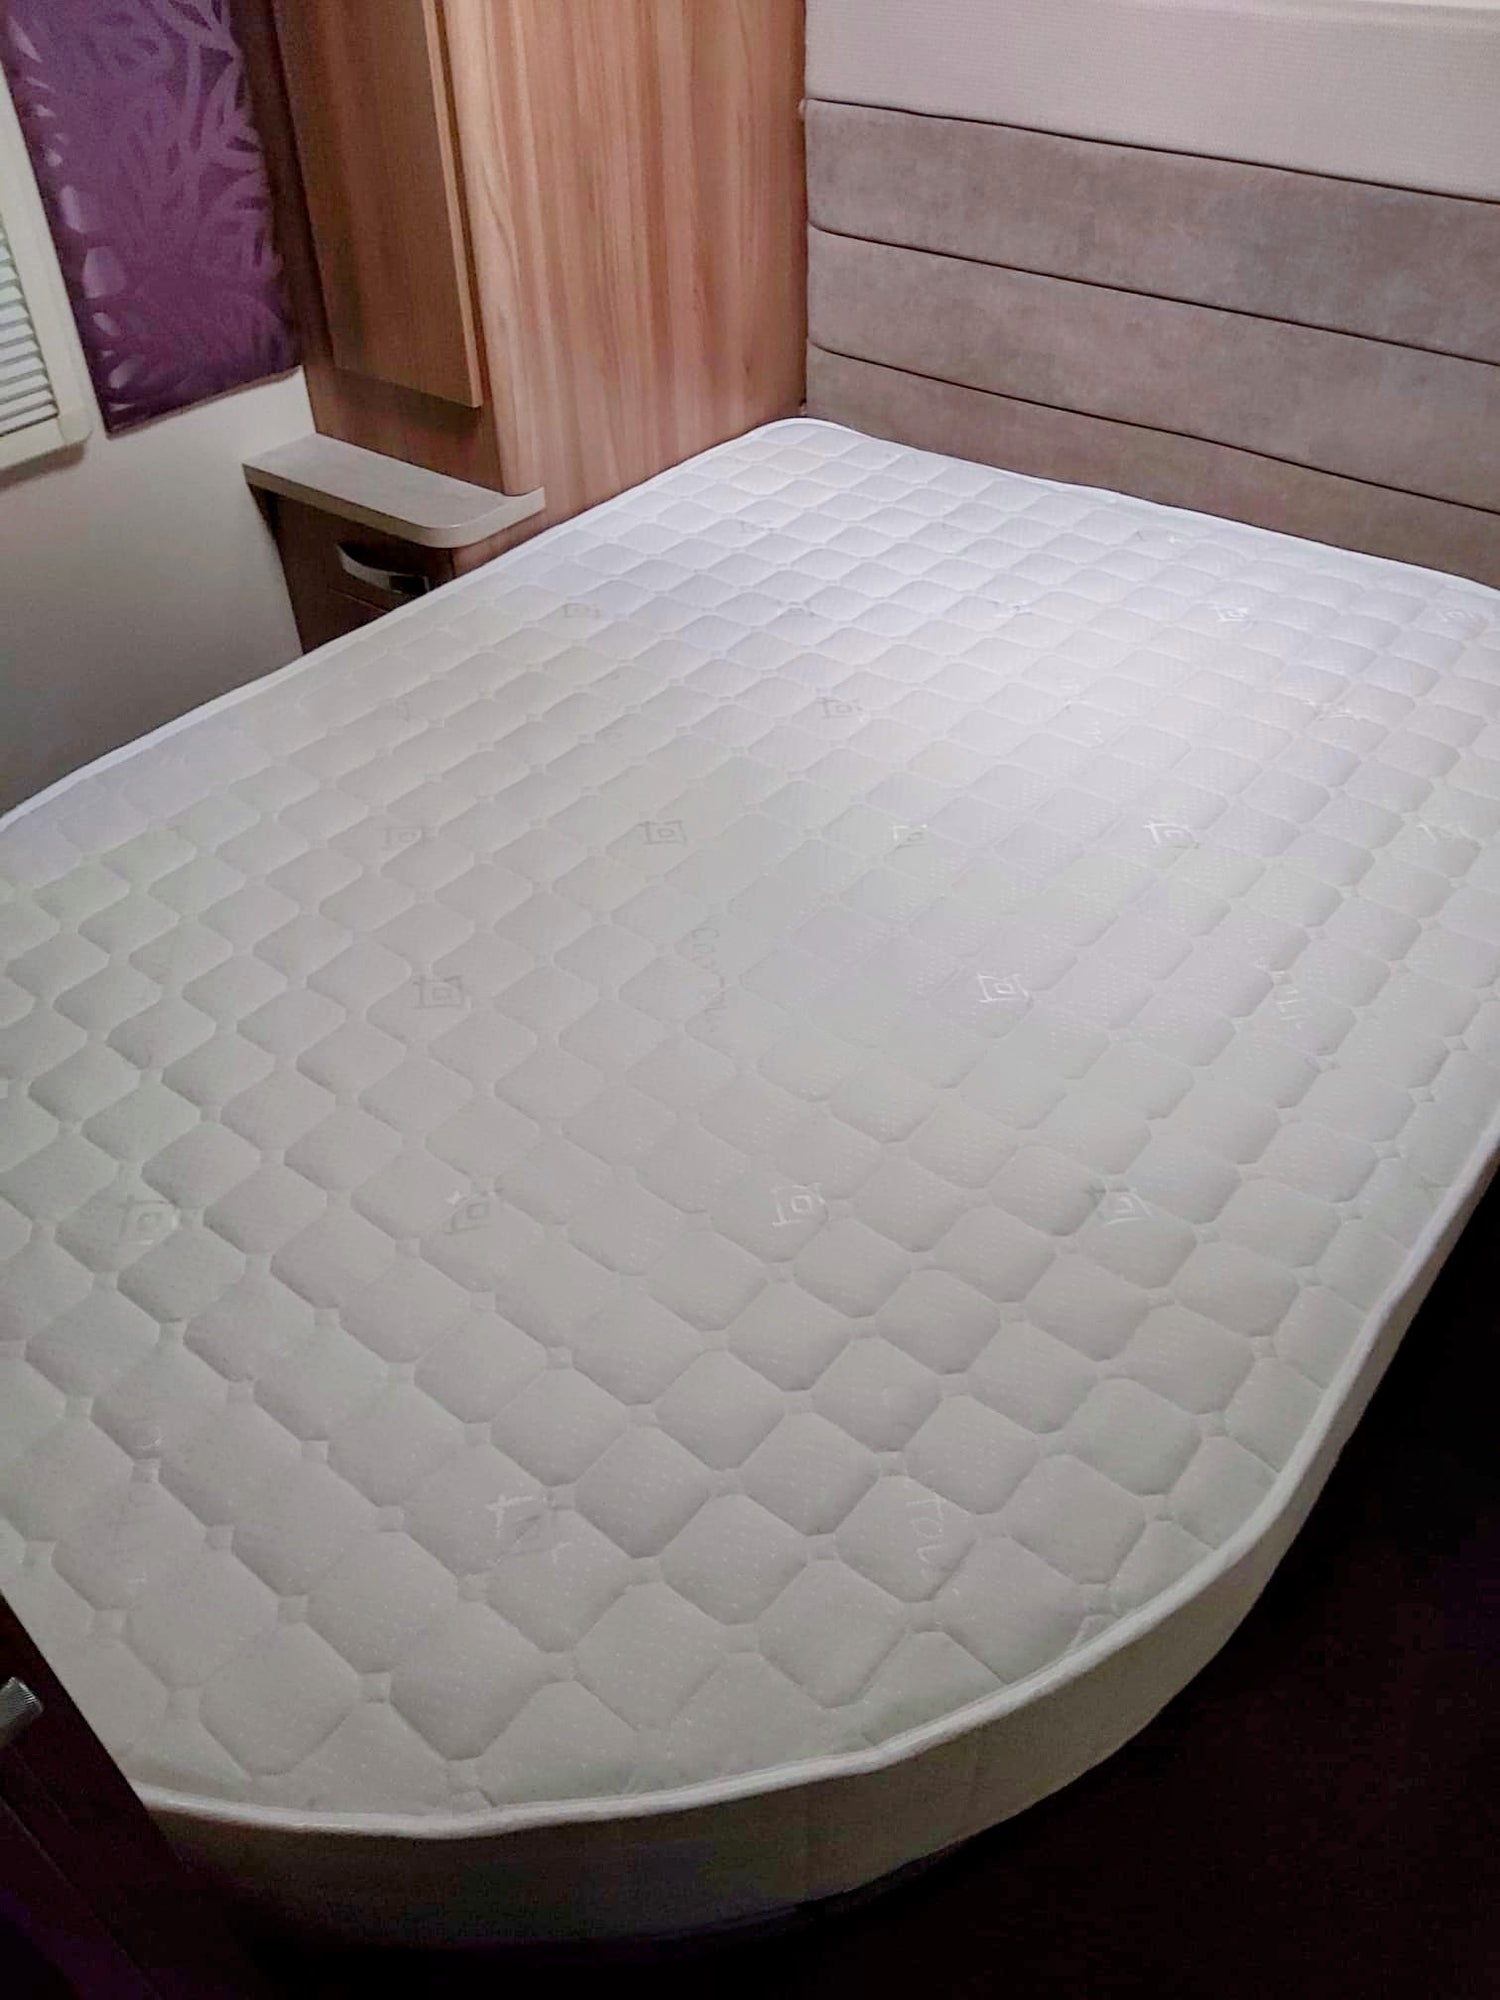 Island-shaped bespoke mattress tailored to fit a fixed bed base, showcased within the elegant interior of a luxurious 2023 caravan model.